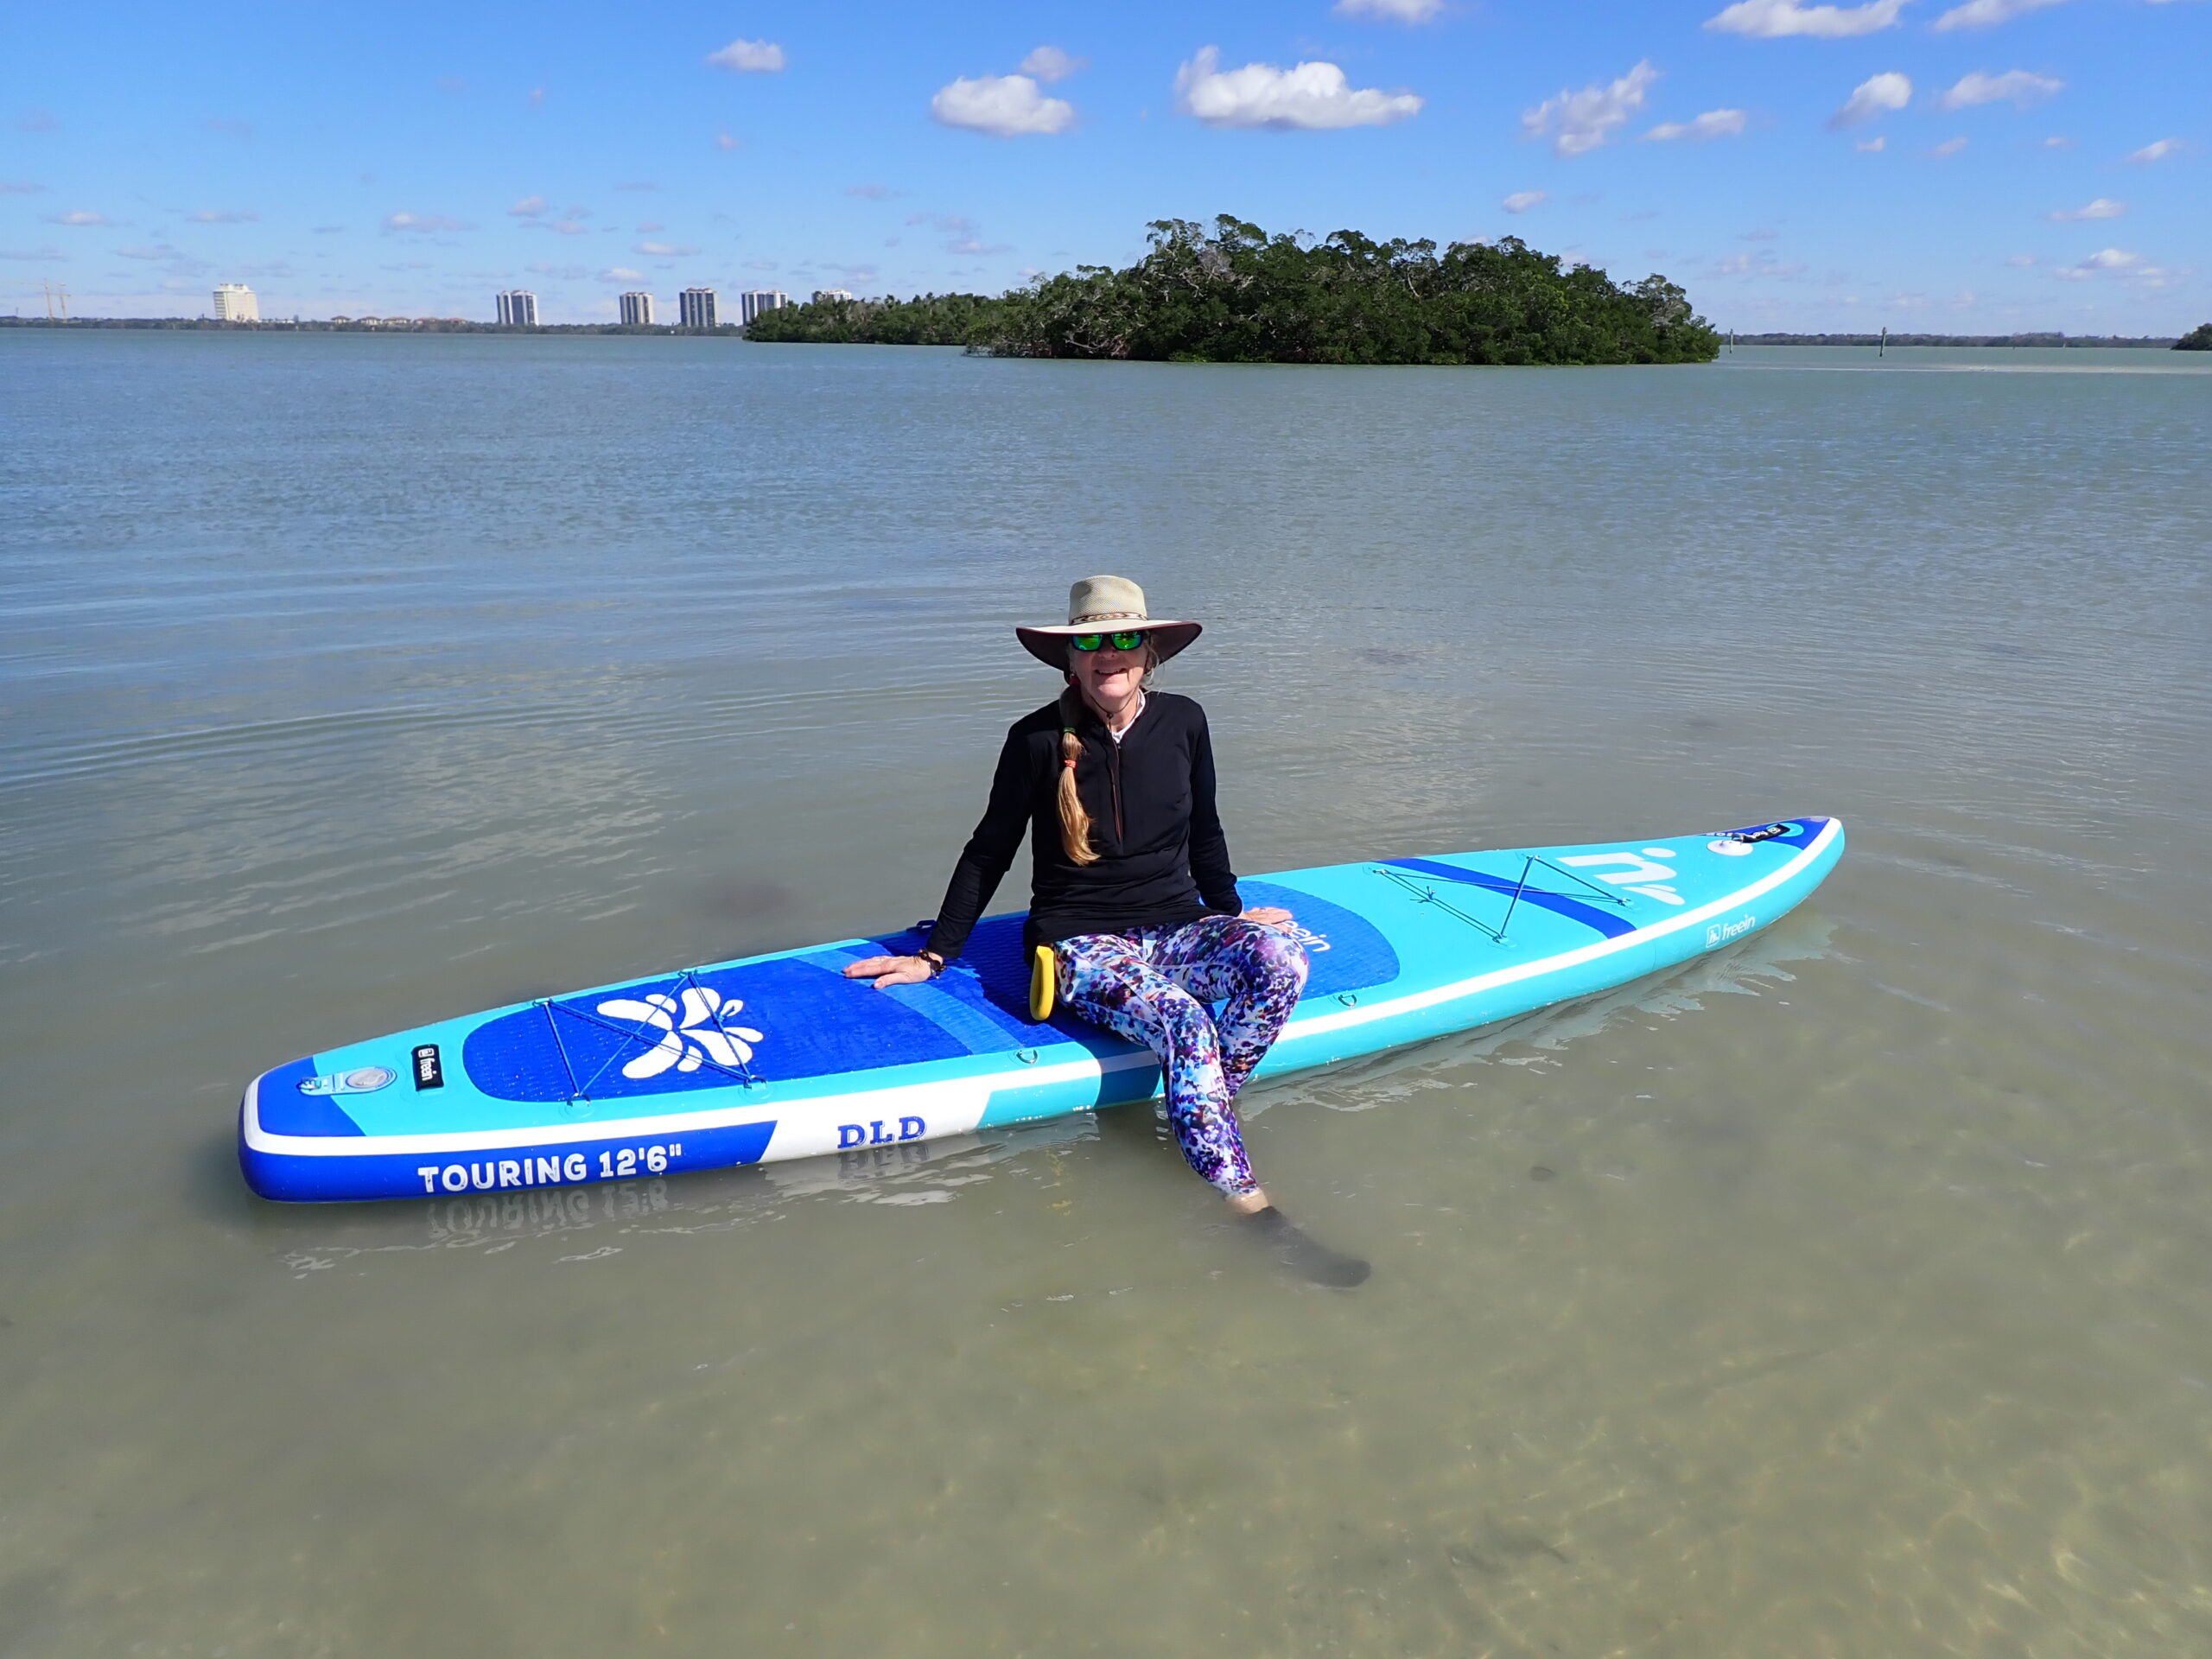 sheree Lincoln on the water with paddle board